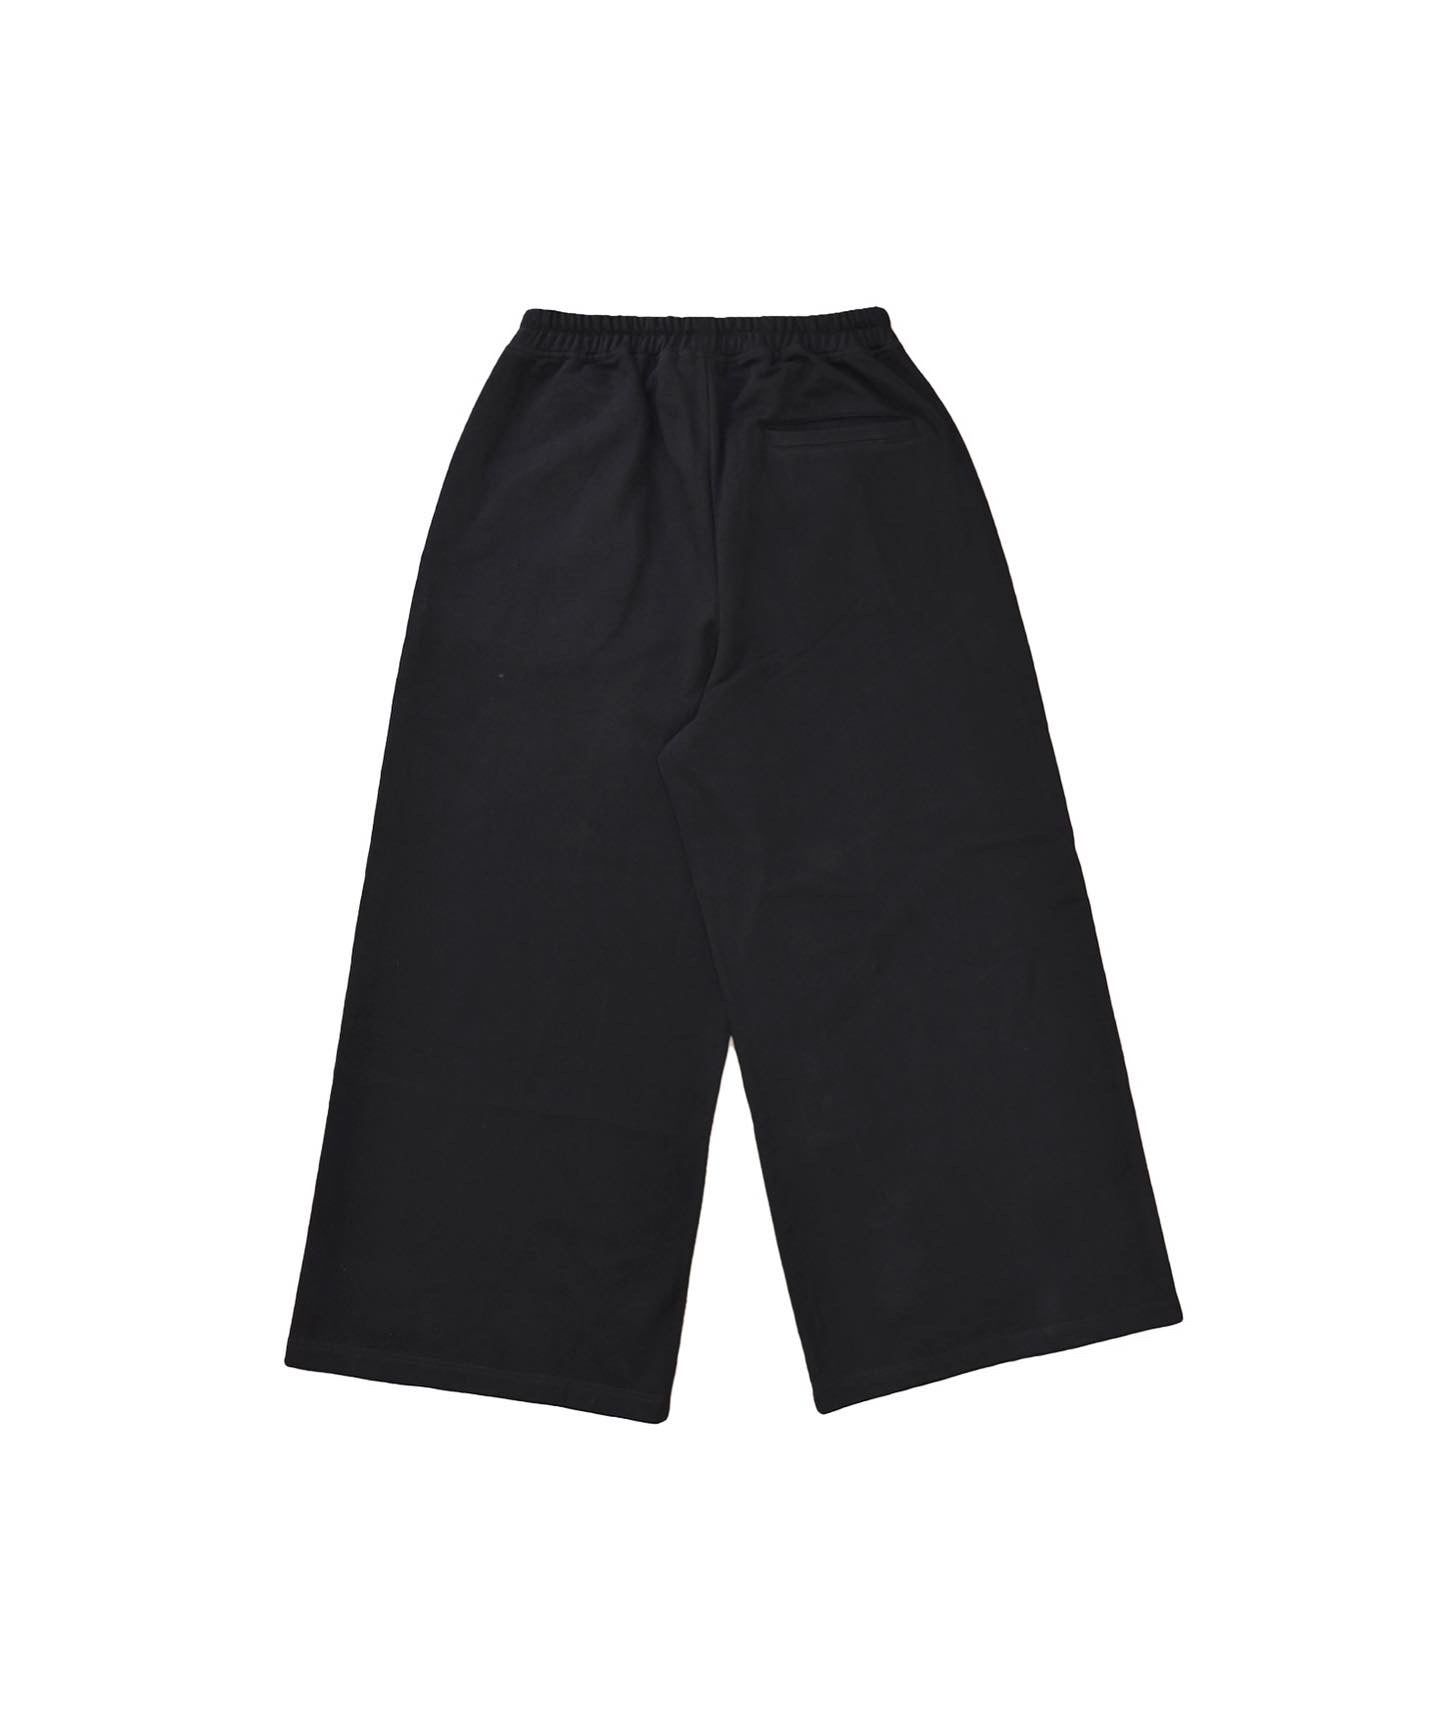 BLACK OVER-DYED BAGGY SWEATPANTS